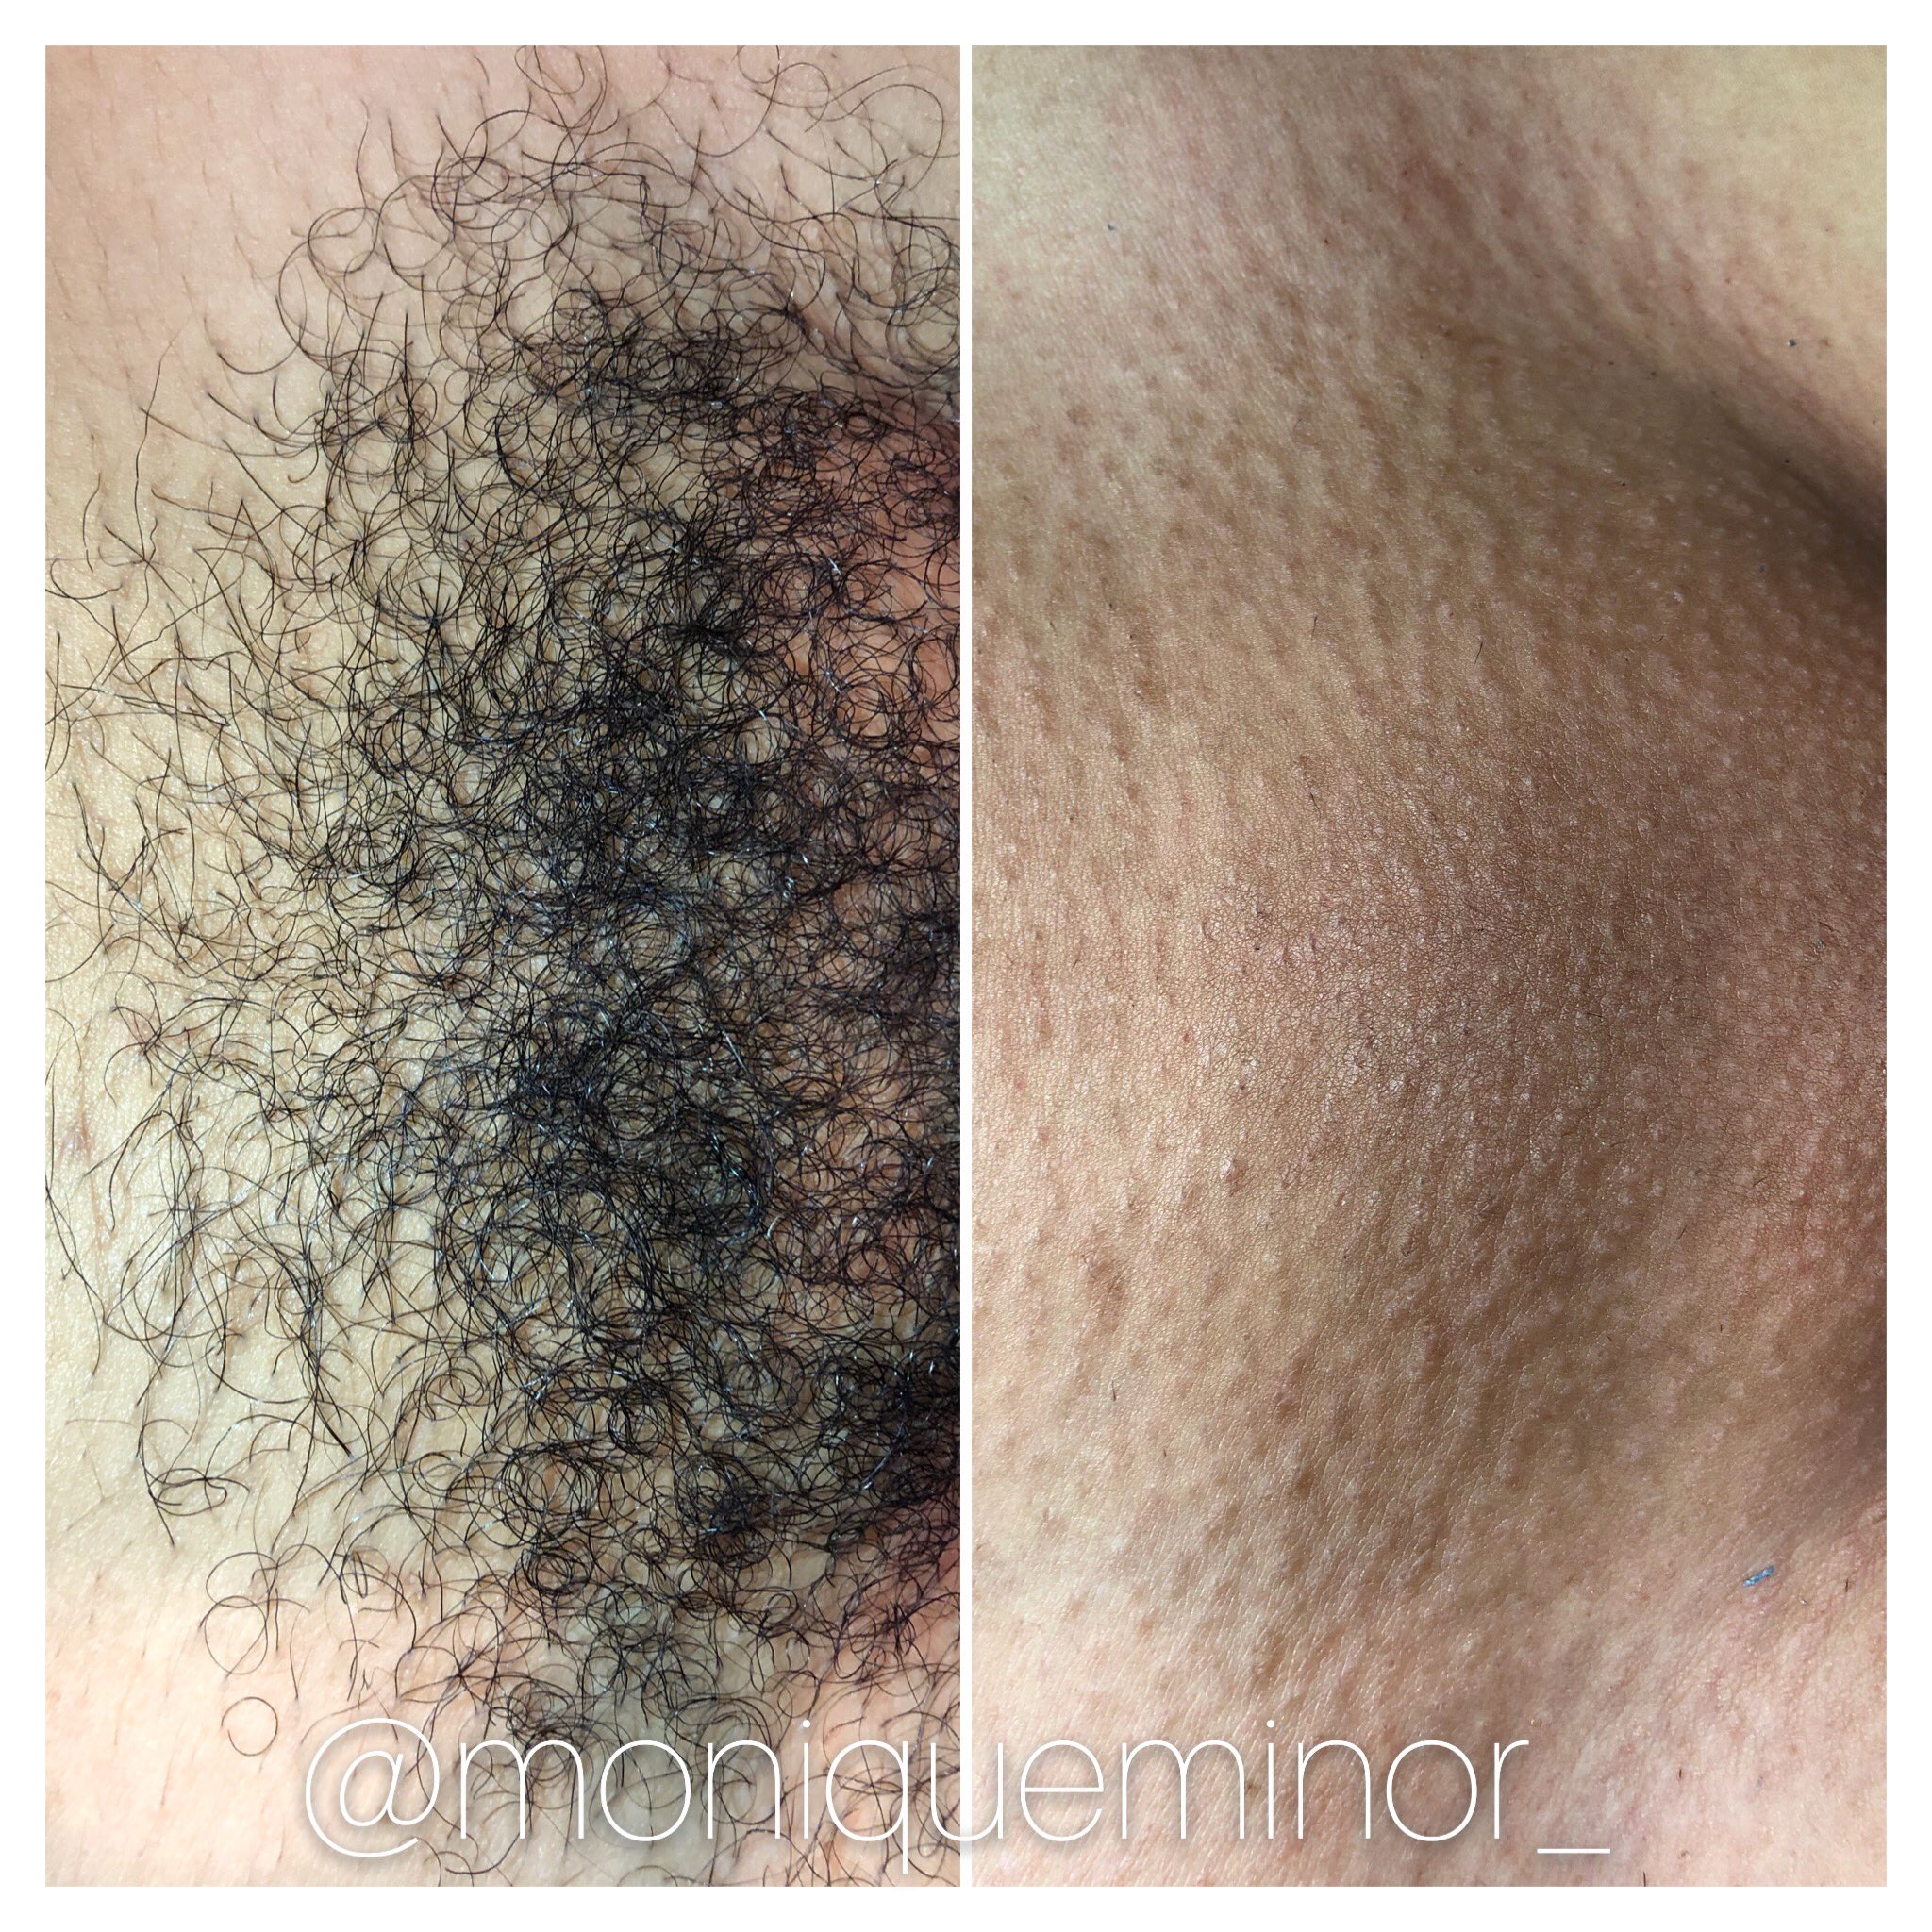 Monique Minor on X: "Before and after Brazilian wax. What a difference.  #moniqueminor #legwax #legwaxing #brazilianwax #summerready #smoothskin  #smoothlegs #underarmwax #pleasantonca #downtownpleasanton  #downtownpleasantonsalon #pleasantonsalon ...